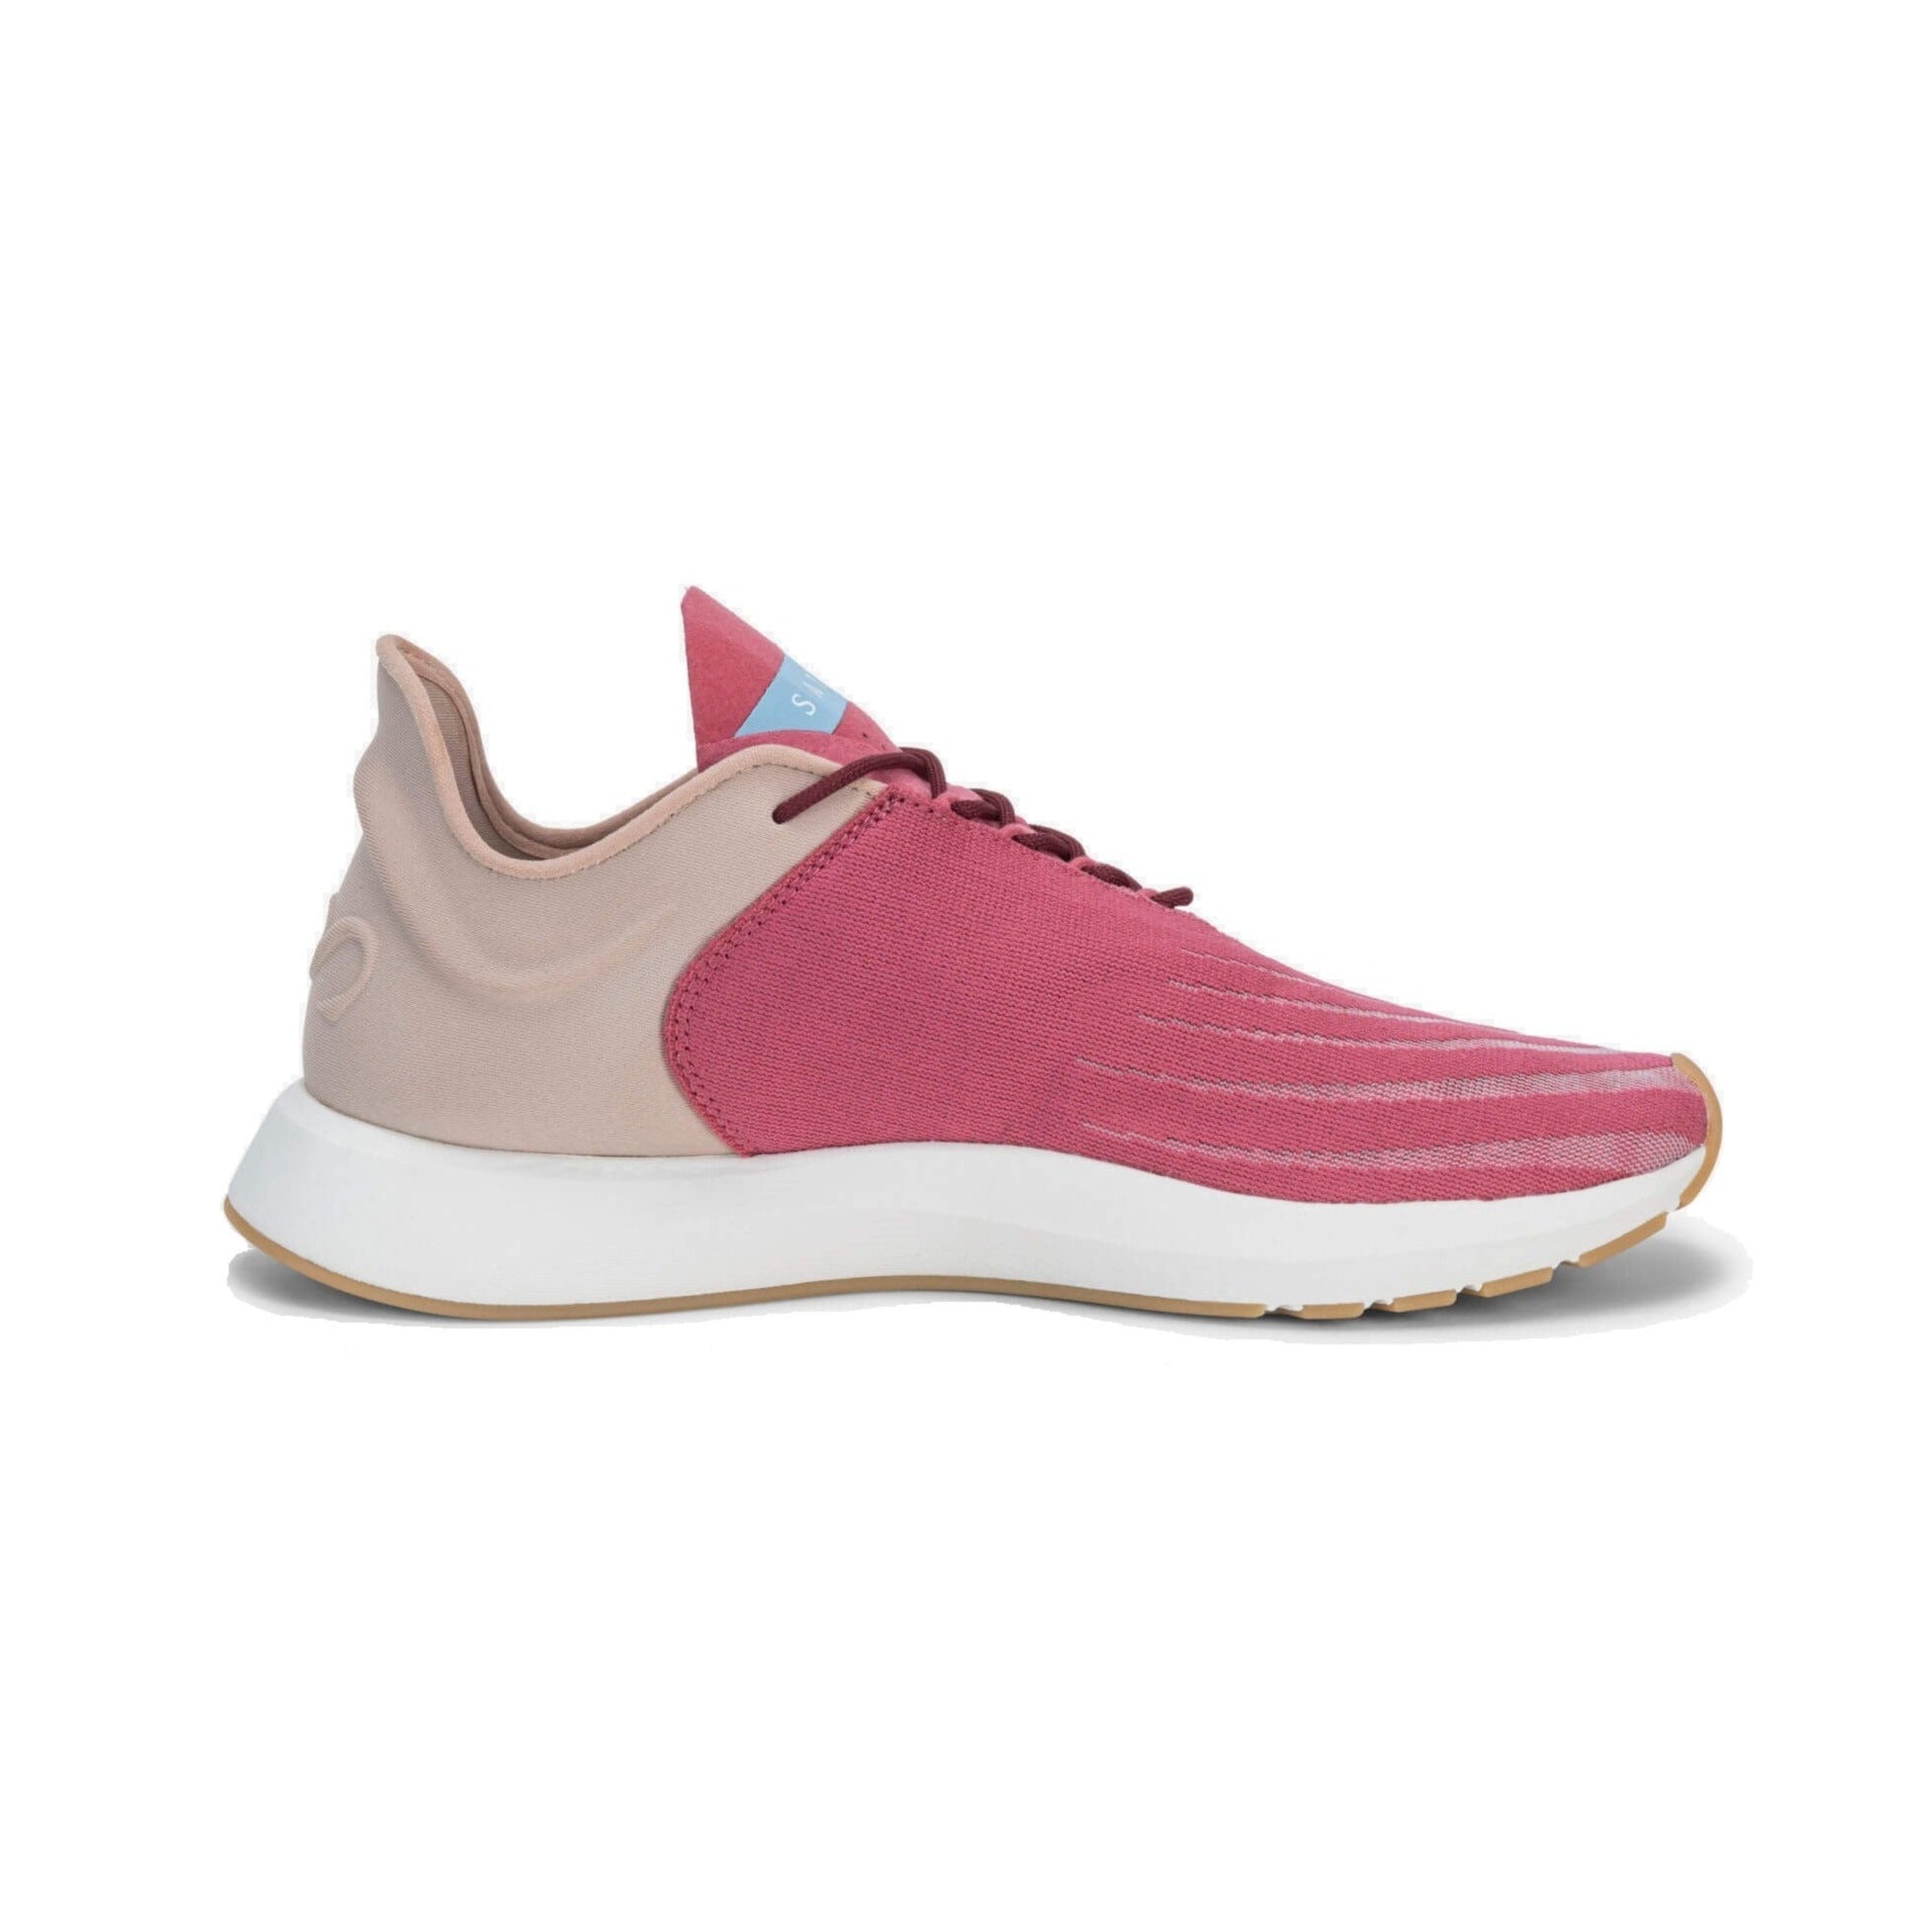 Saysh One sneakers | Color: Monomix